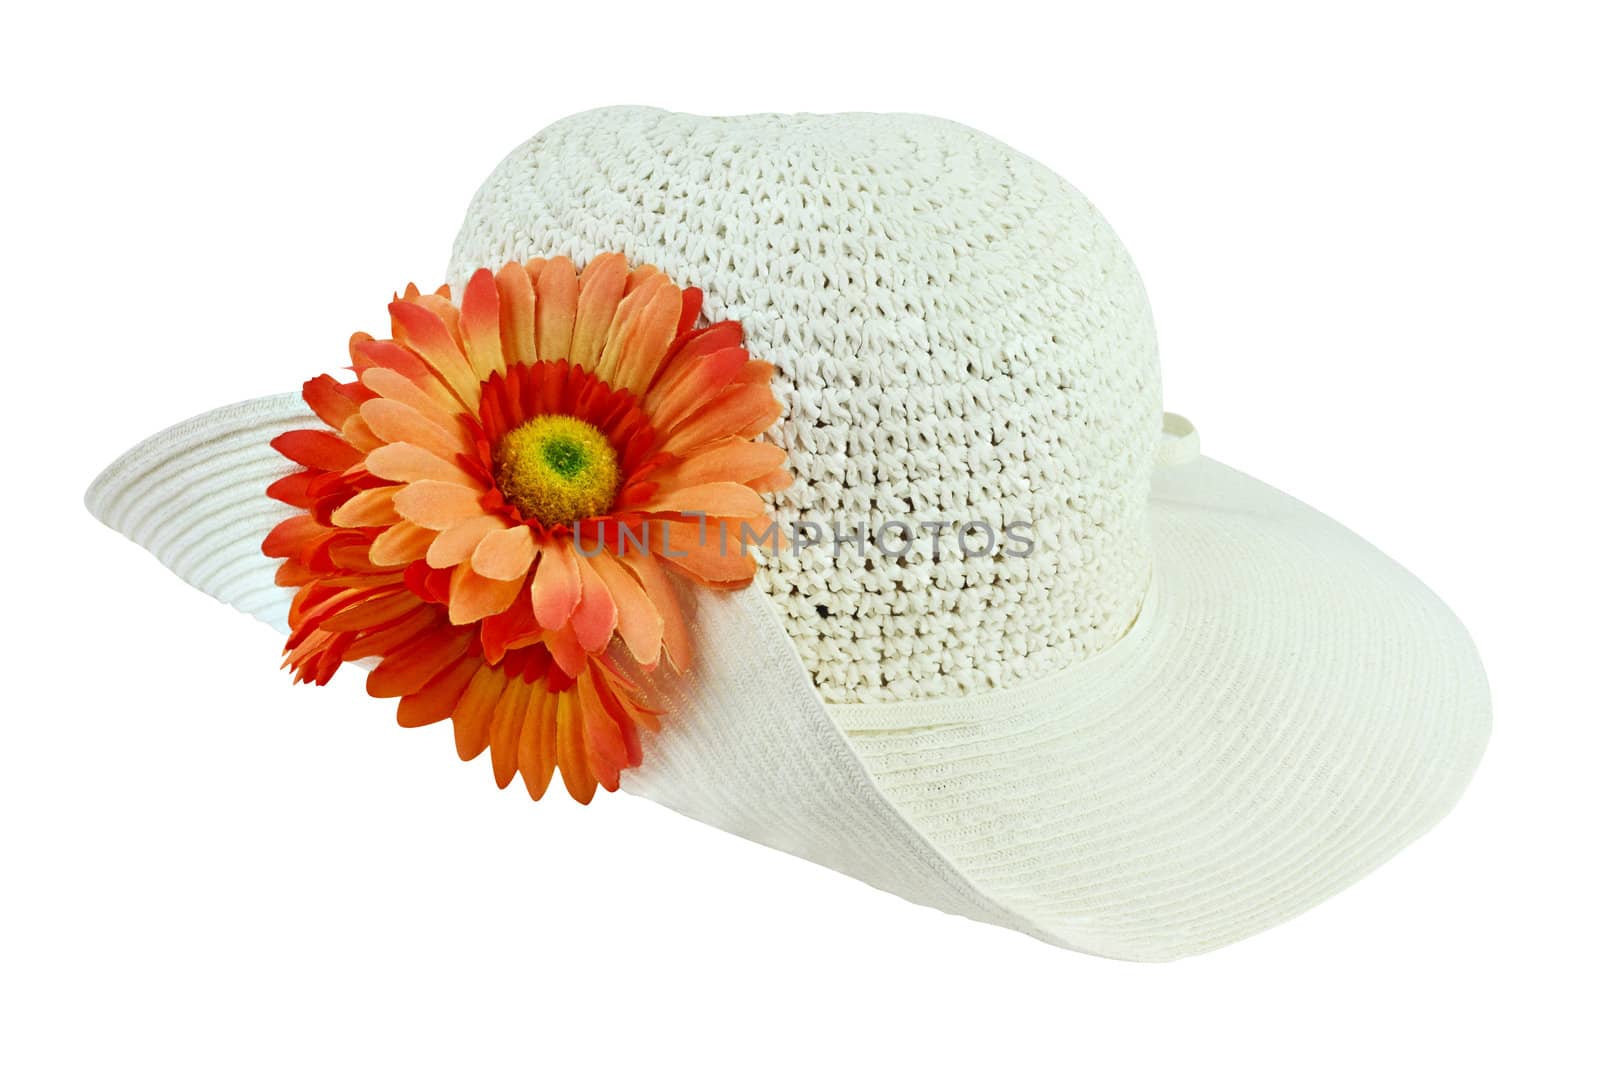 White sunhat with flowers isolated over a white background with clipping path included.